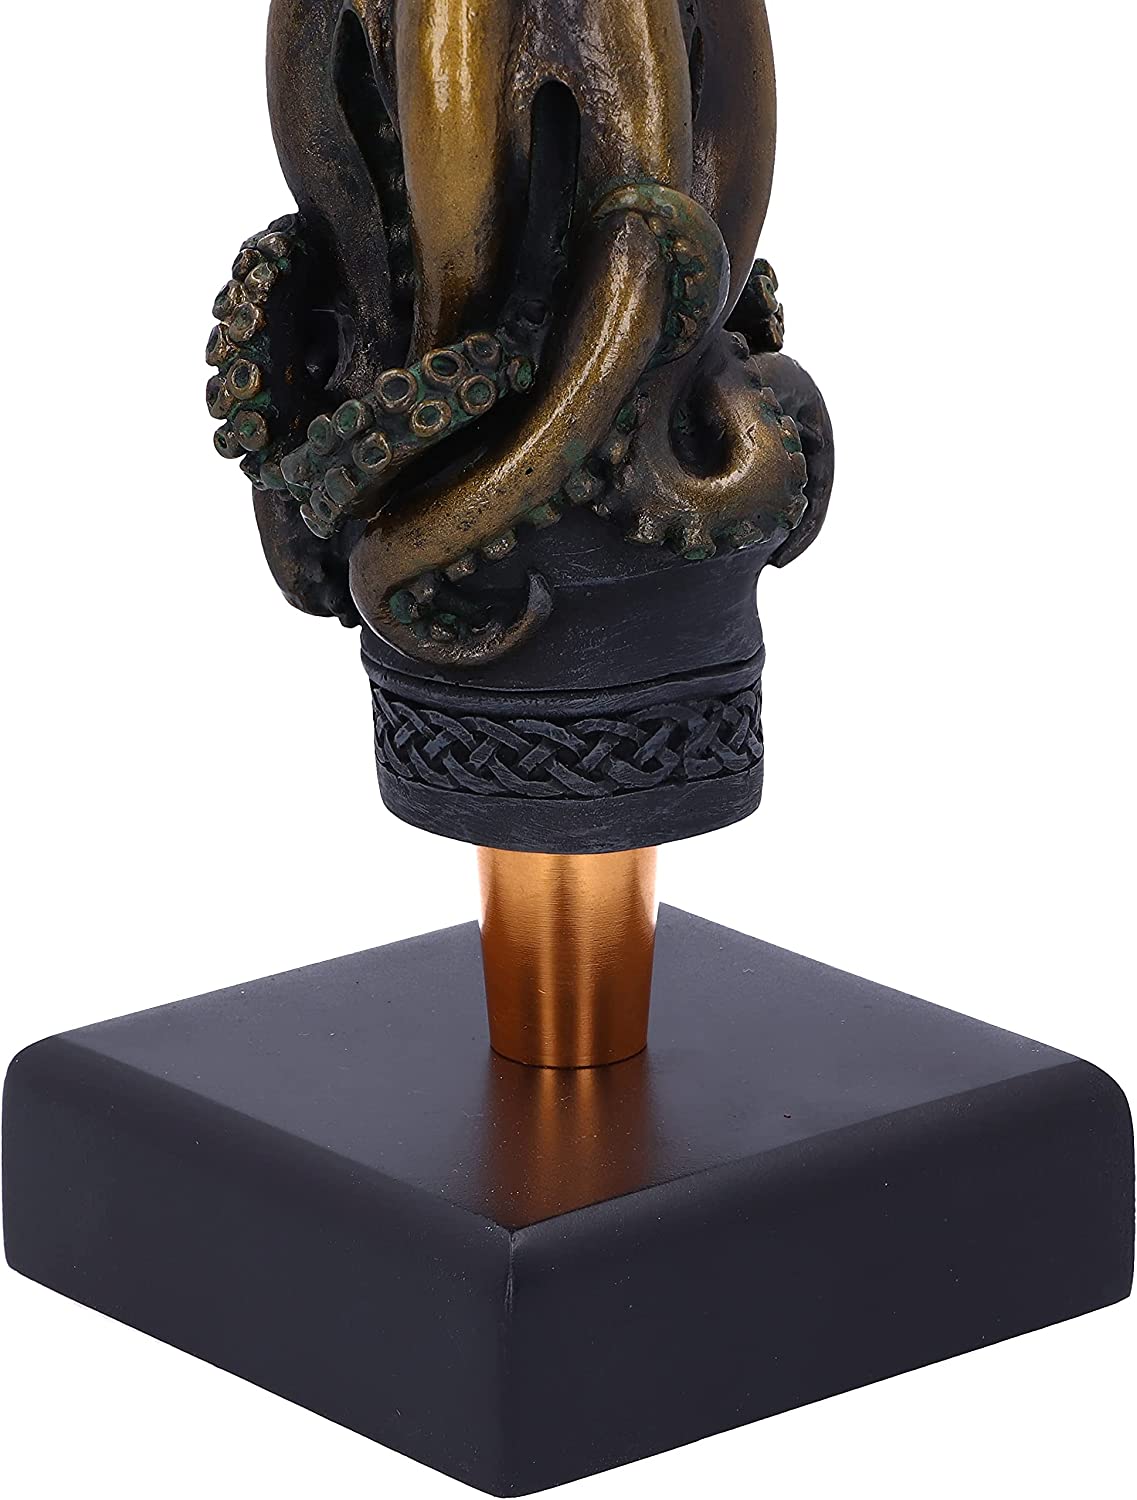 Steampunk Octopus Hold